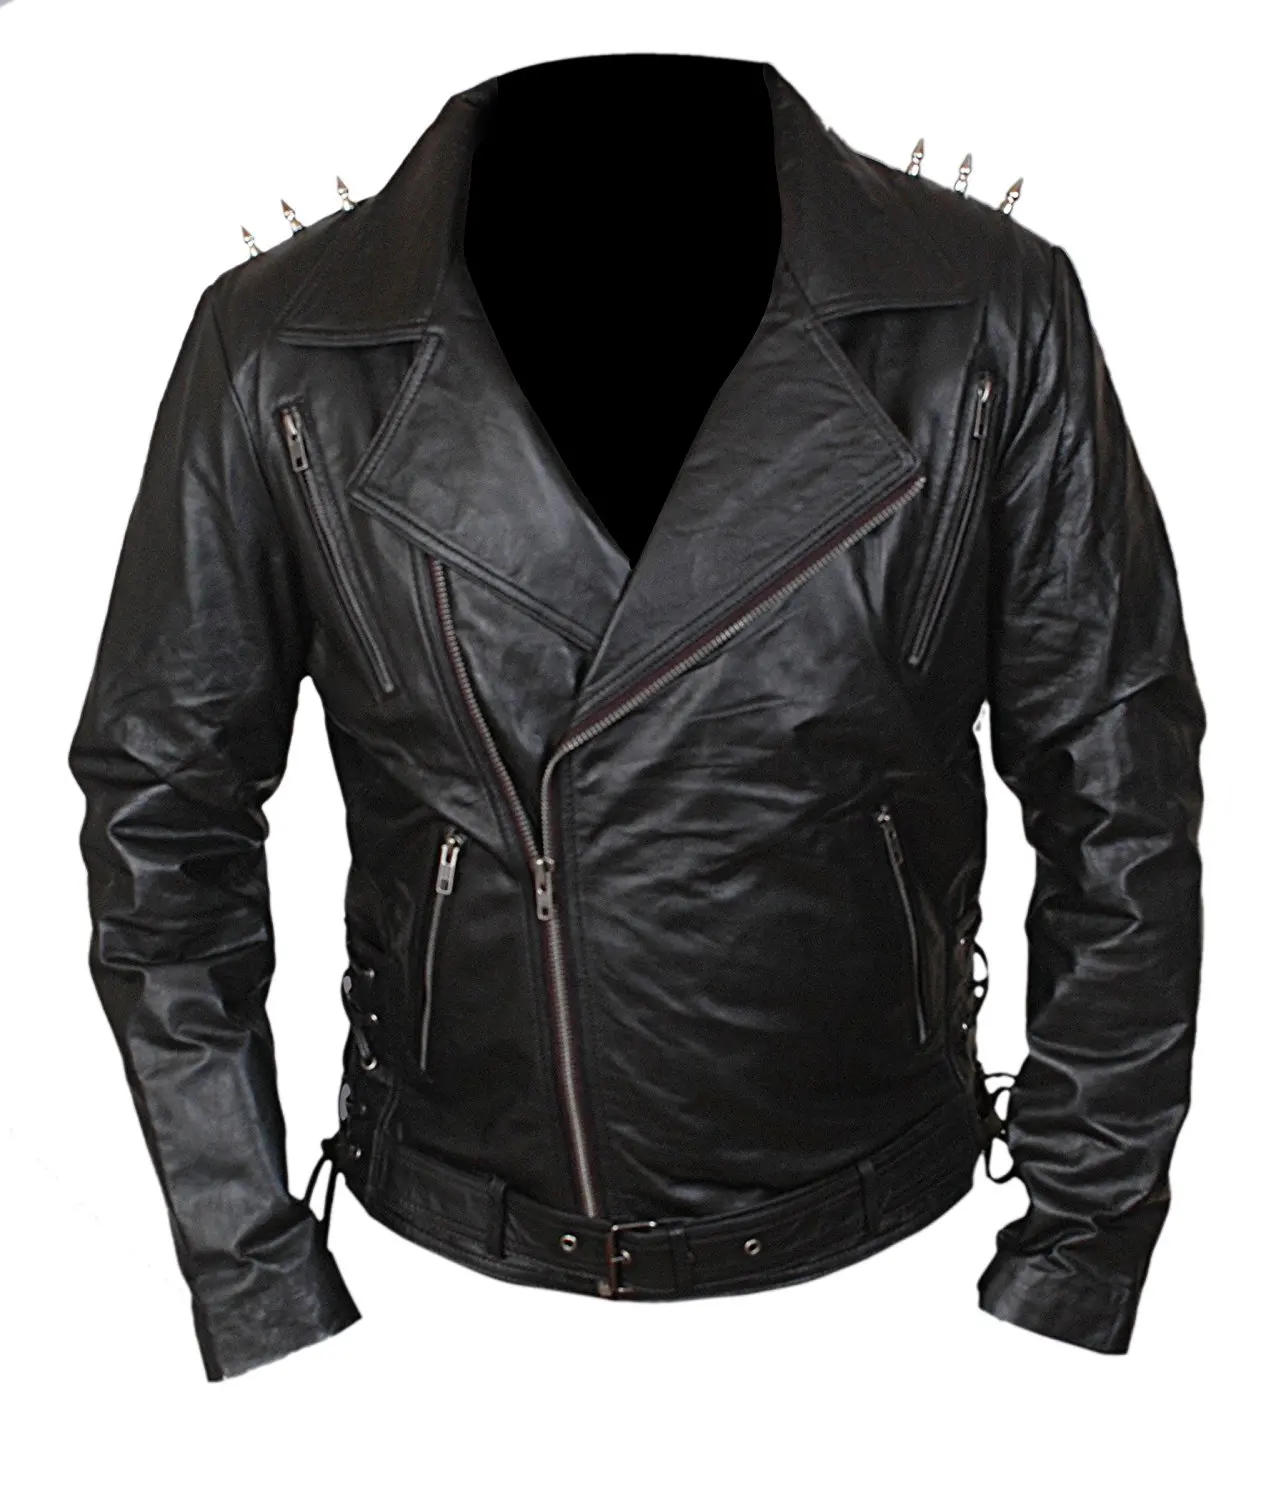 Cheap Ghost Rider Jacket, find Ghost Rider Jacket deals on line at ...